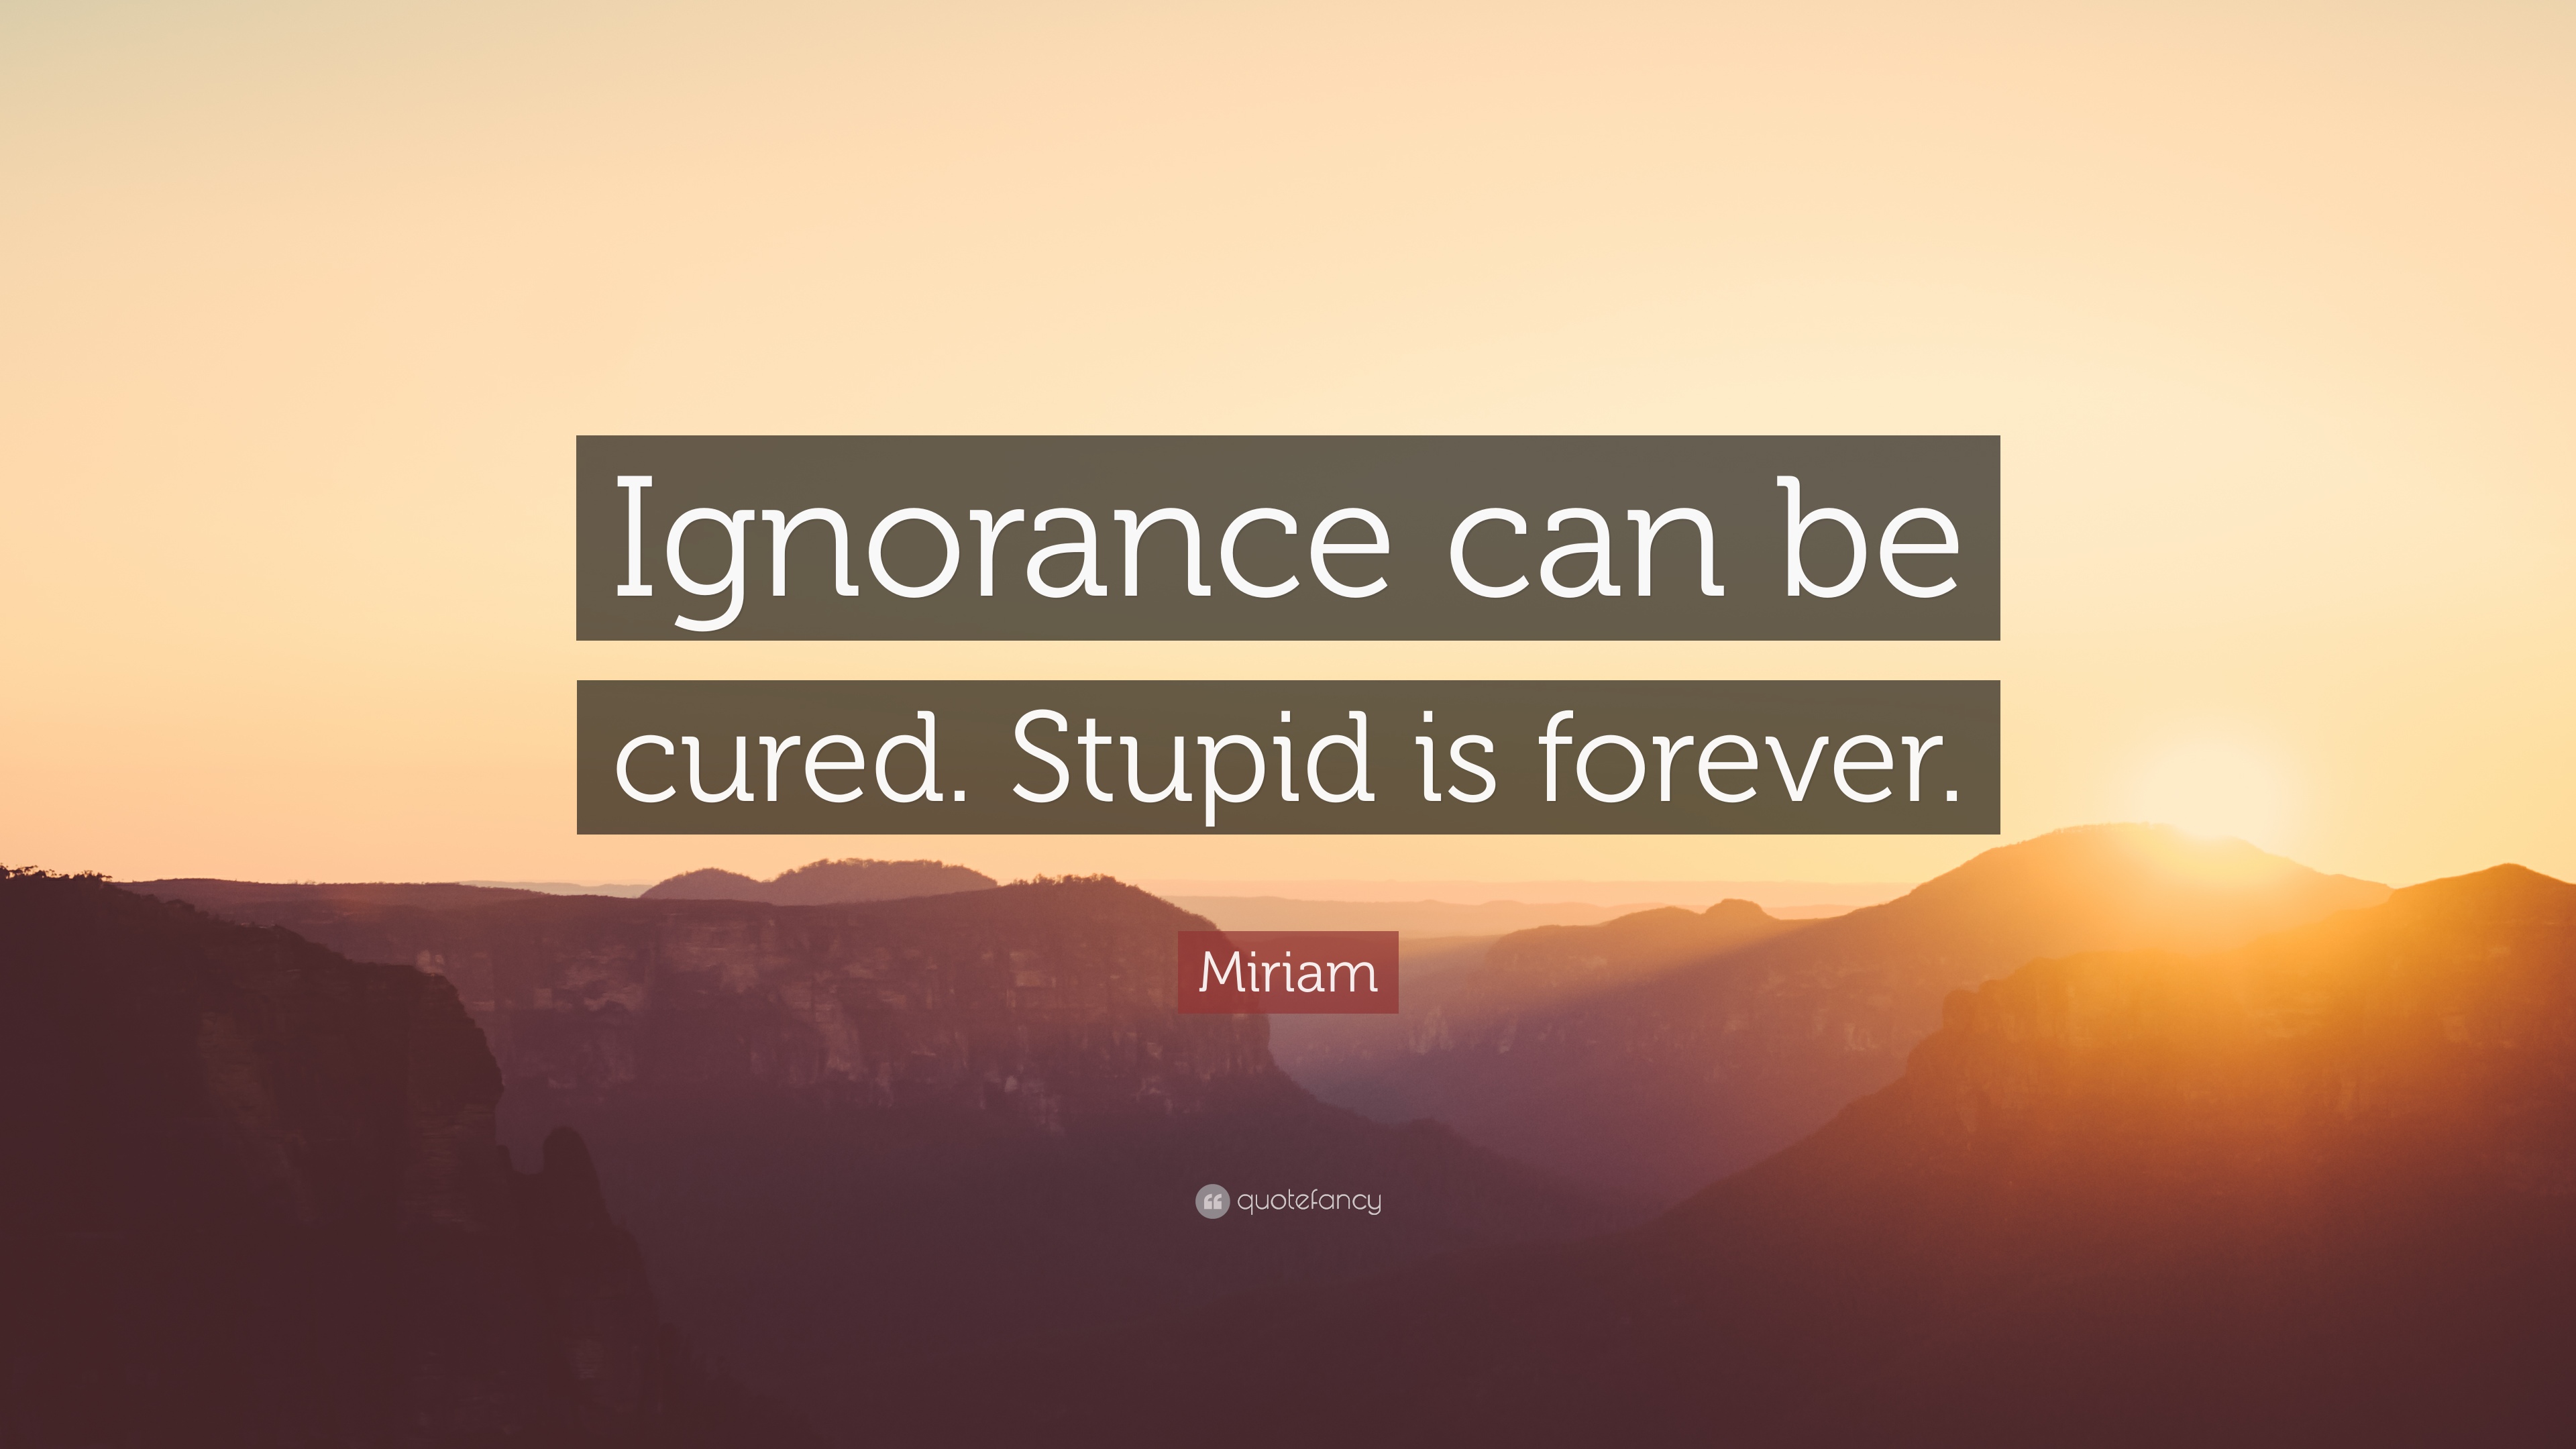 Miriam Quote: “Ignorance can be cured. Stupid is forever.” (10 ...